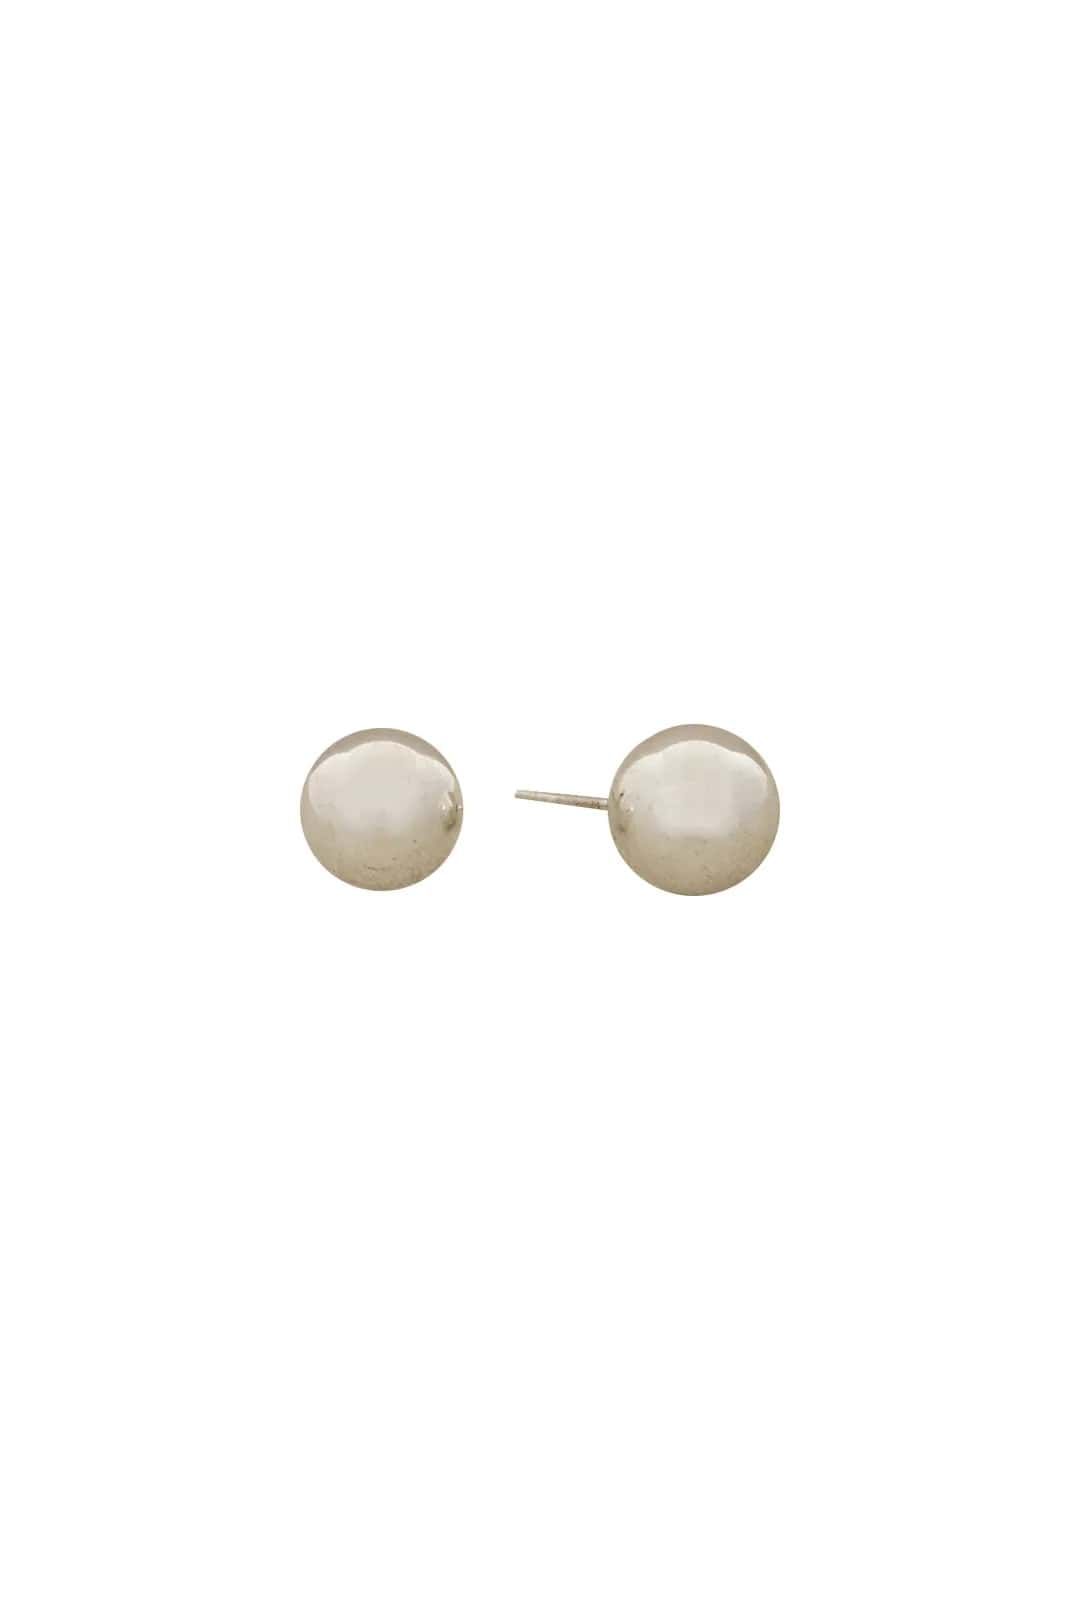 10mm Metal Ball Stud Earring by Adorne, available for rent